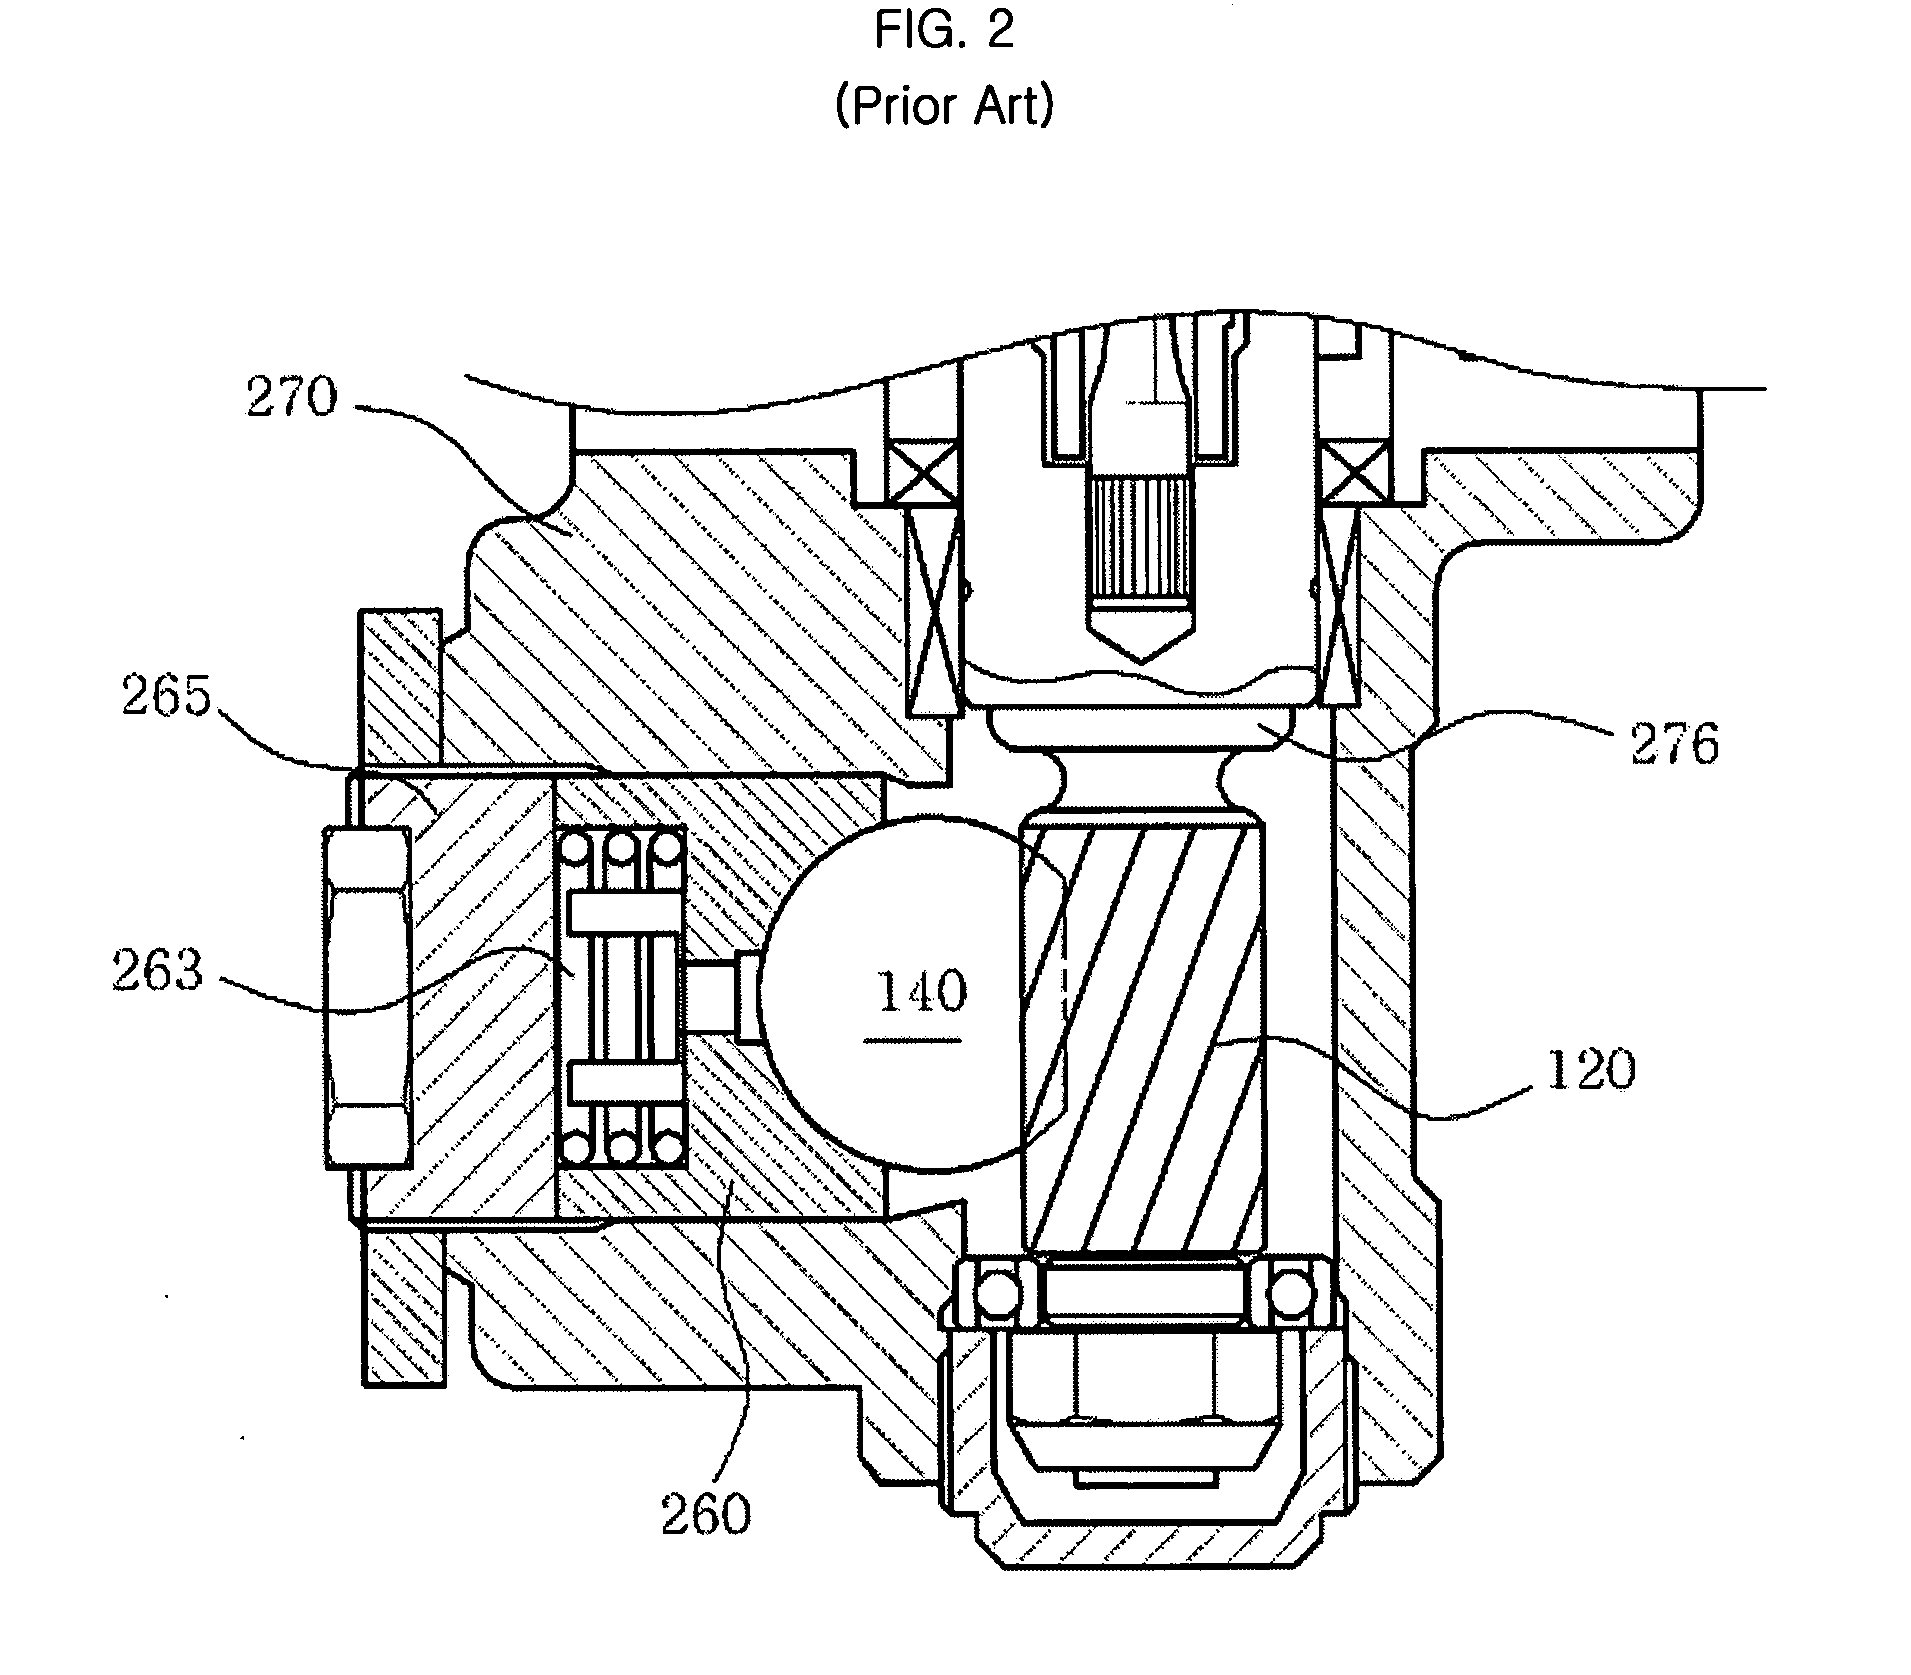 Apparatus for automatically compensating for clearance of support yoke in rack-and-pinion steering system